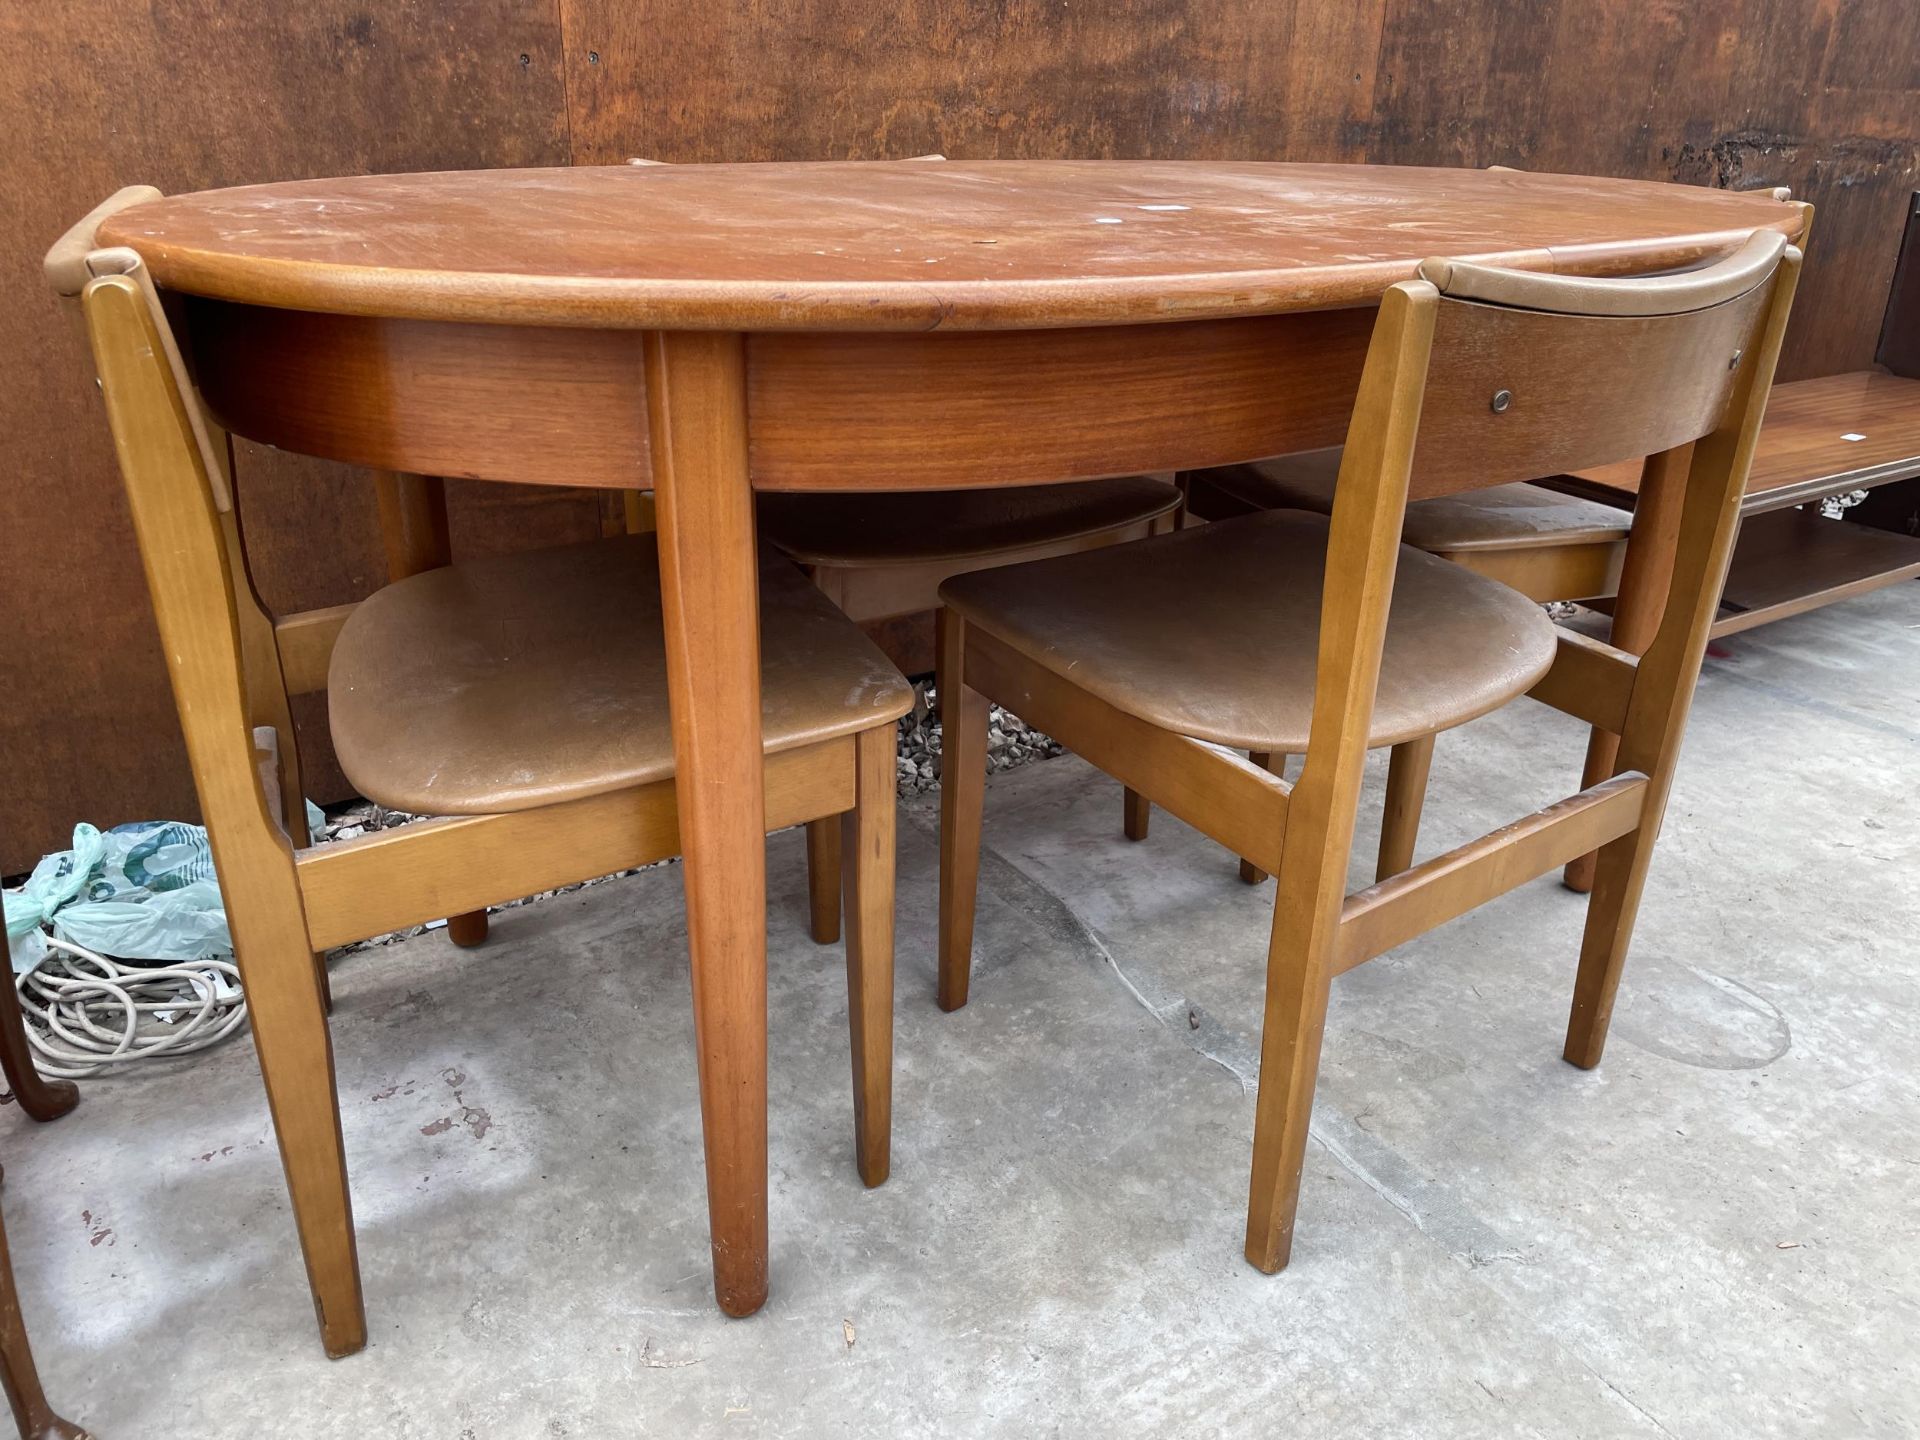 AN OVAL RETRO TEAK EXTENDING DINING TABLE, 60 X 36" (LEAF 18") AND FOUR CHAIRS - Image 2 of 6